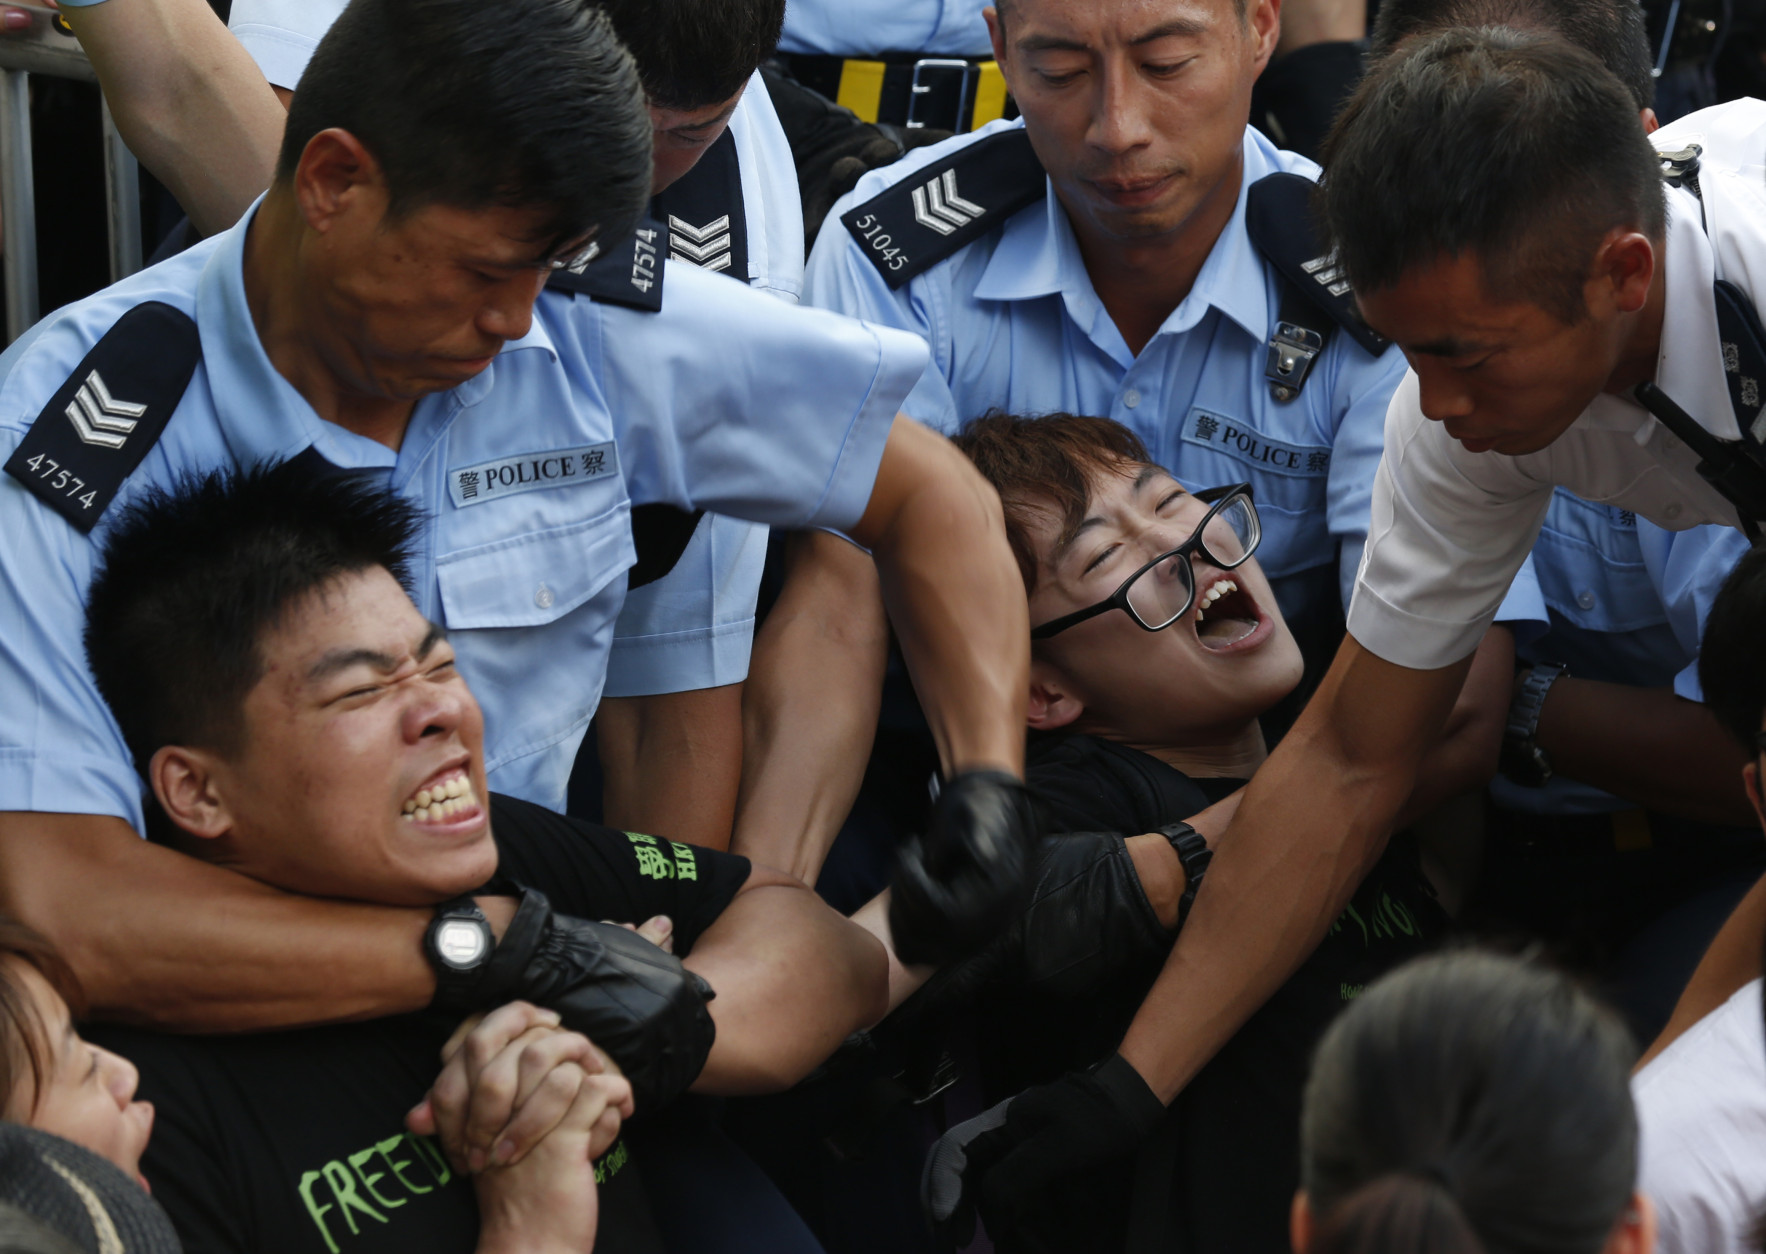 FOR USE AS DESIRED, YEAR END PHOTOS - FILE - Protesters are taken away by police officers after hundreds of protesters staged a peaceful sit-ins overnight on a street in the financial district in Hong Kong Wednesday, July 2, 2014, following a huge rally to show their support for democratic reform and oppose Beijing's desire to have the final say on candidates for the chief executive's job. (AP Photo/Kin Cheung, File)